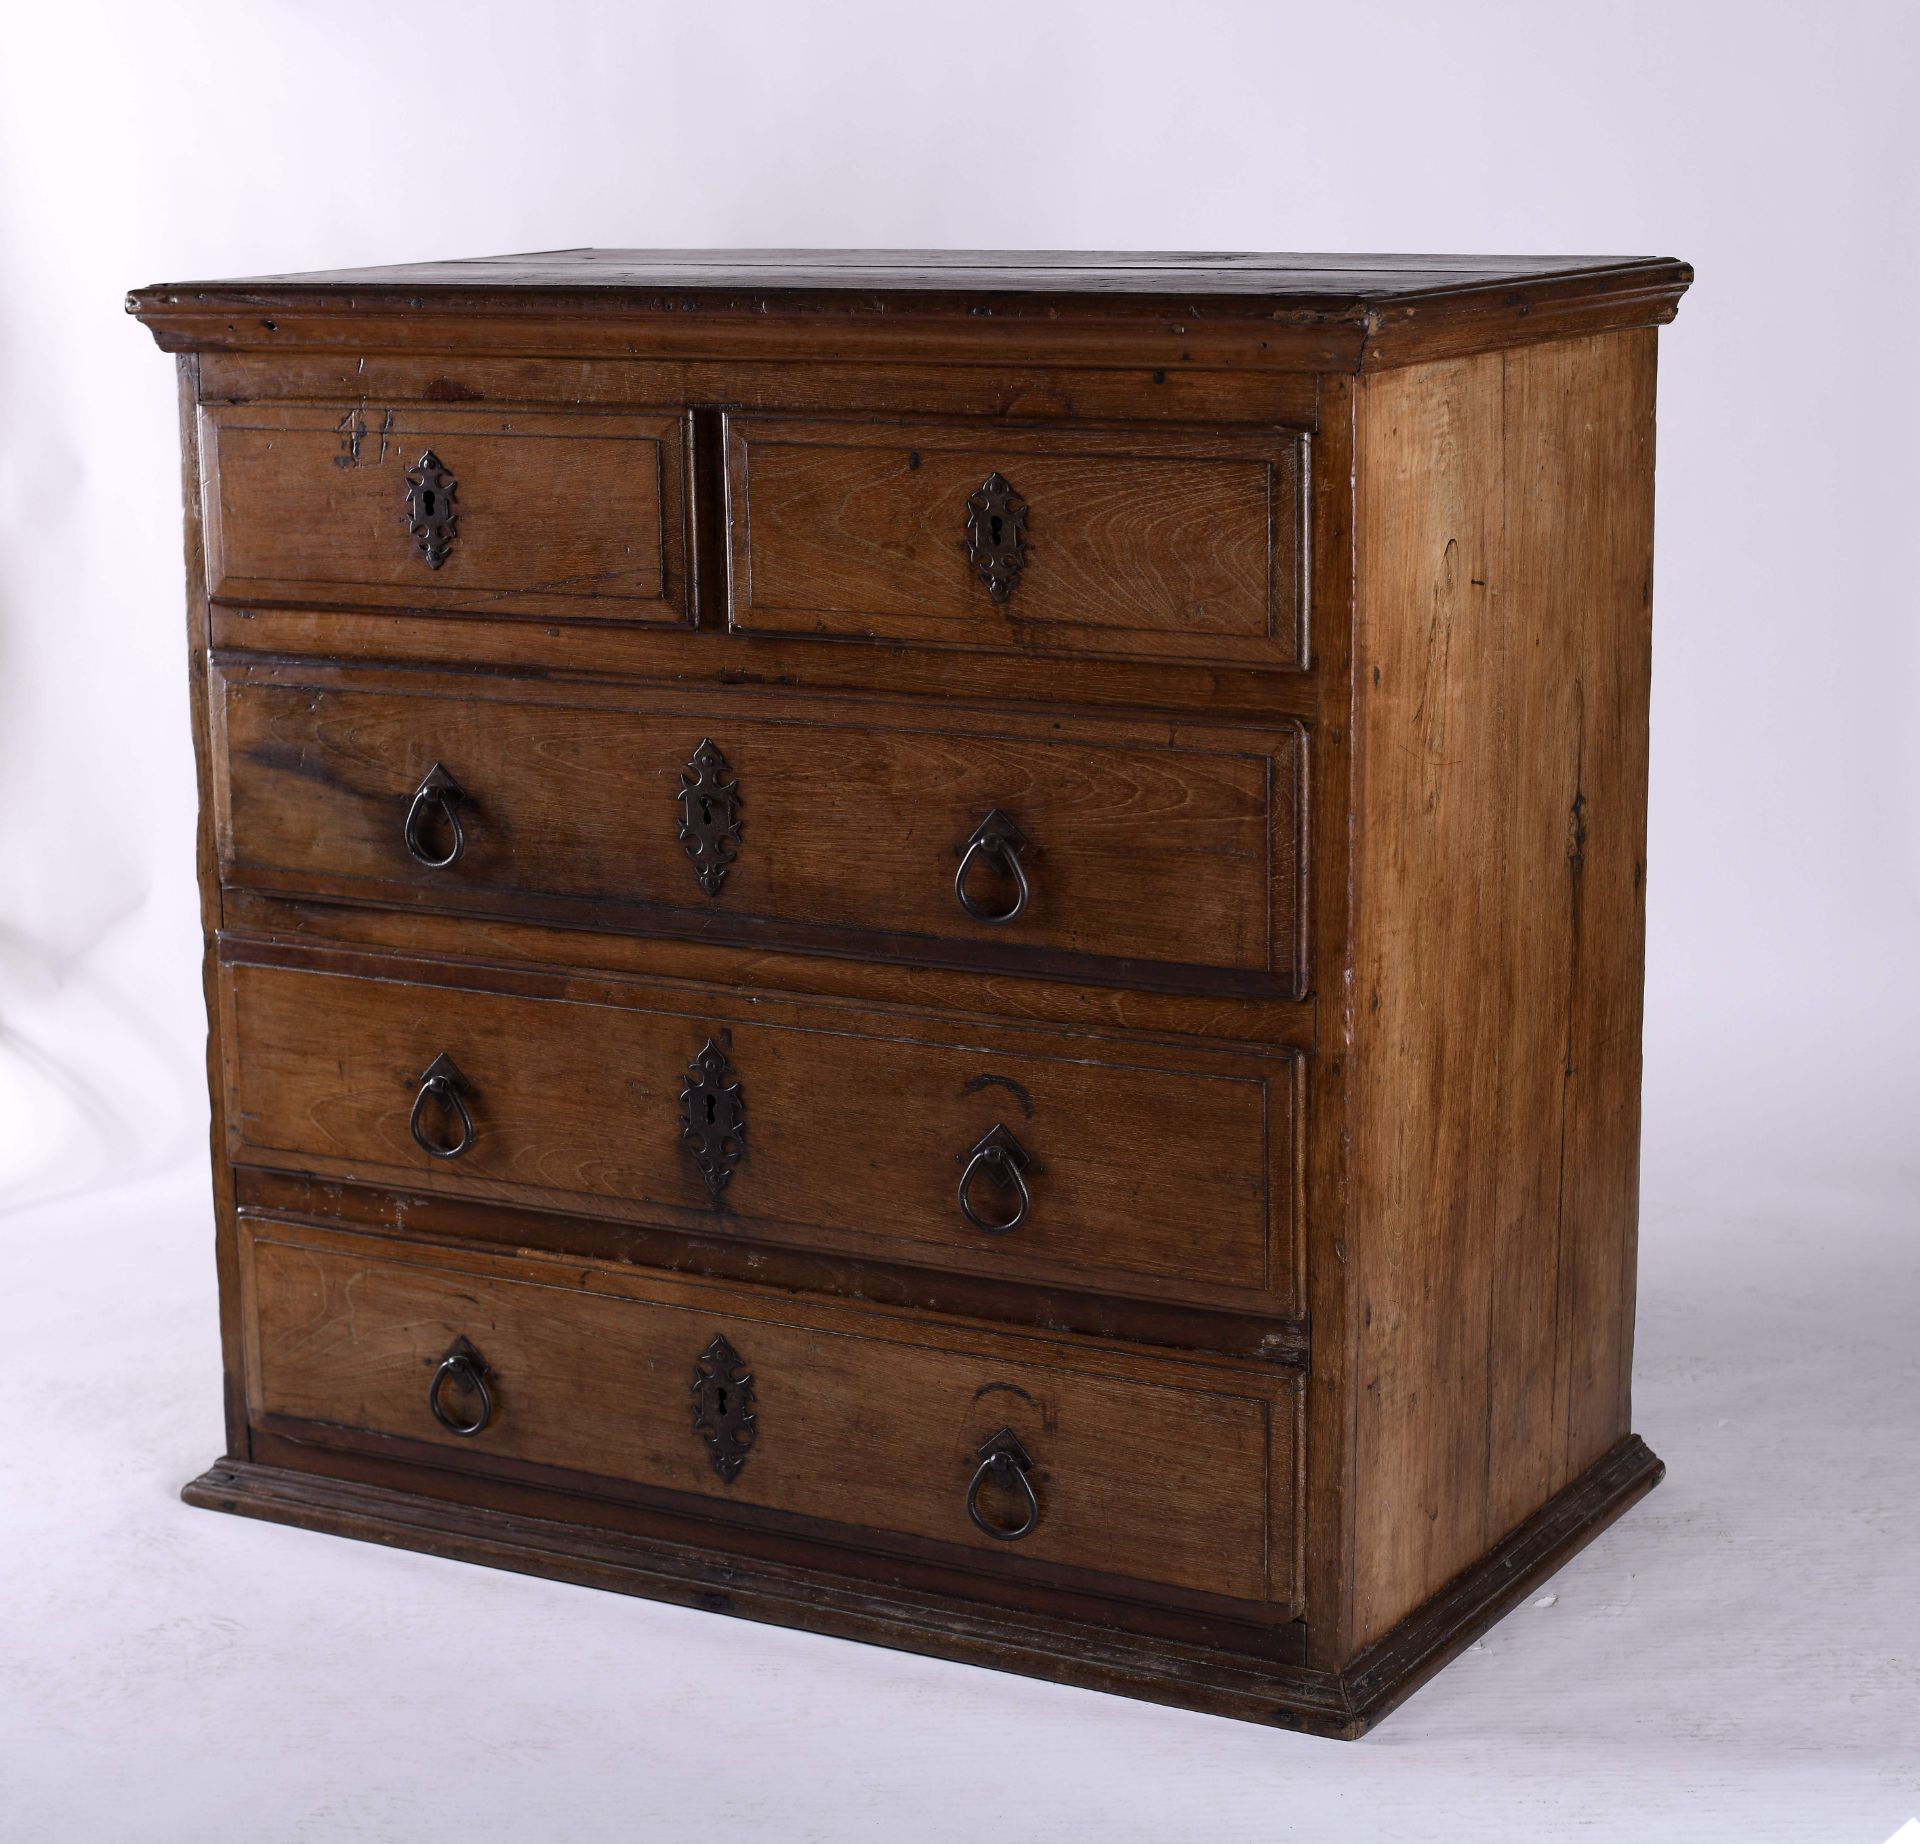 A Chest of Drawers - Image 3 of 3